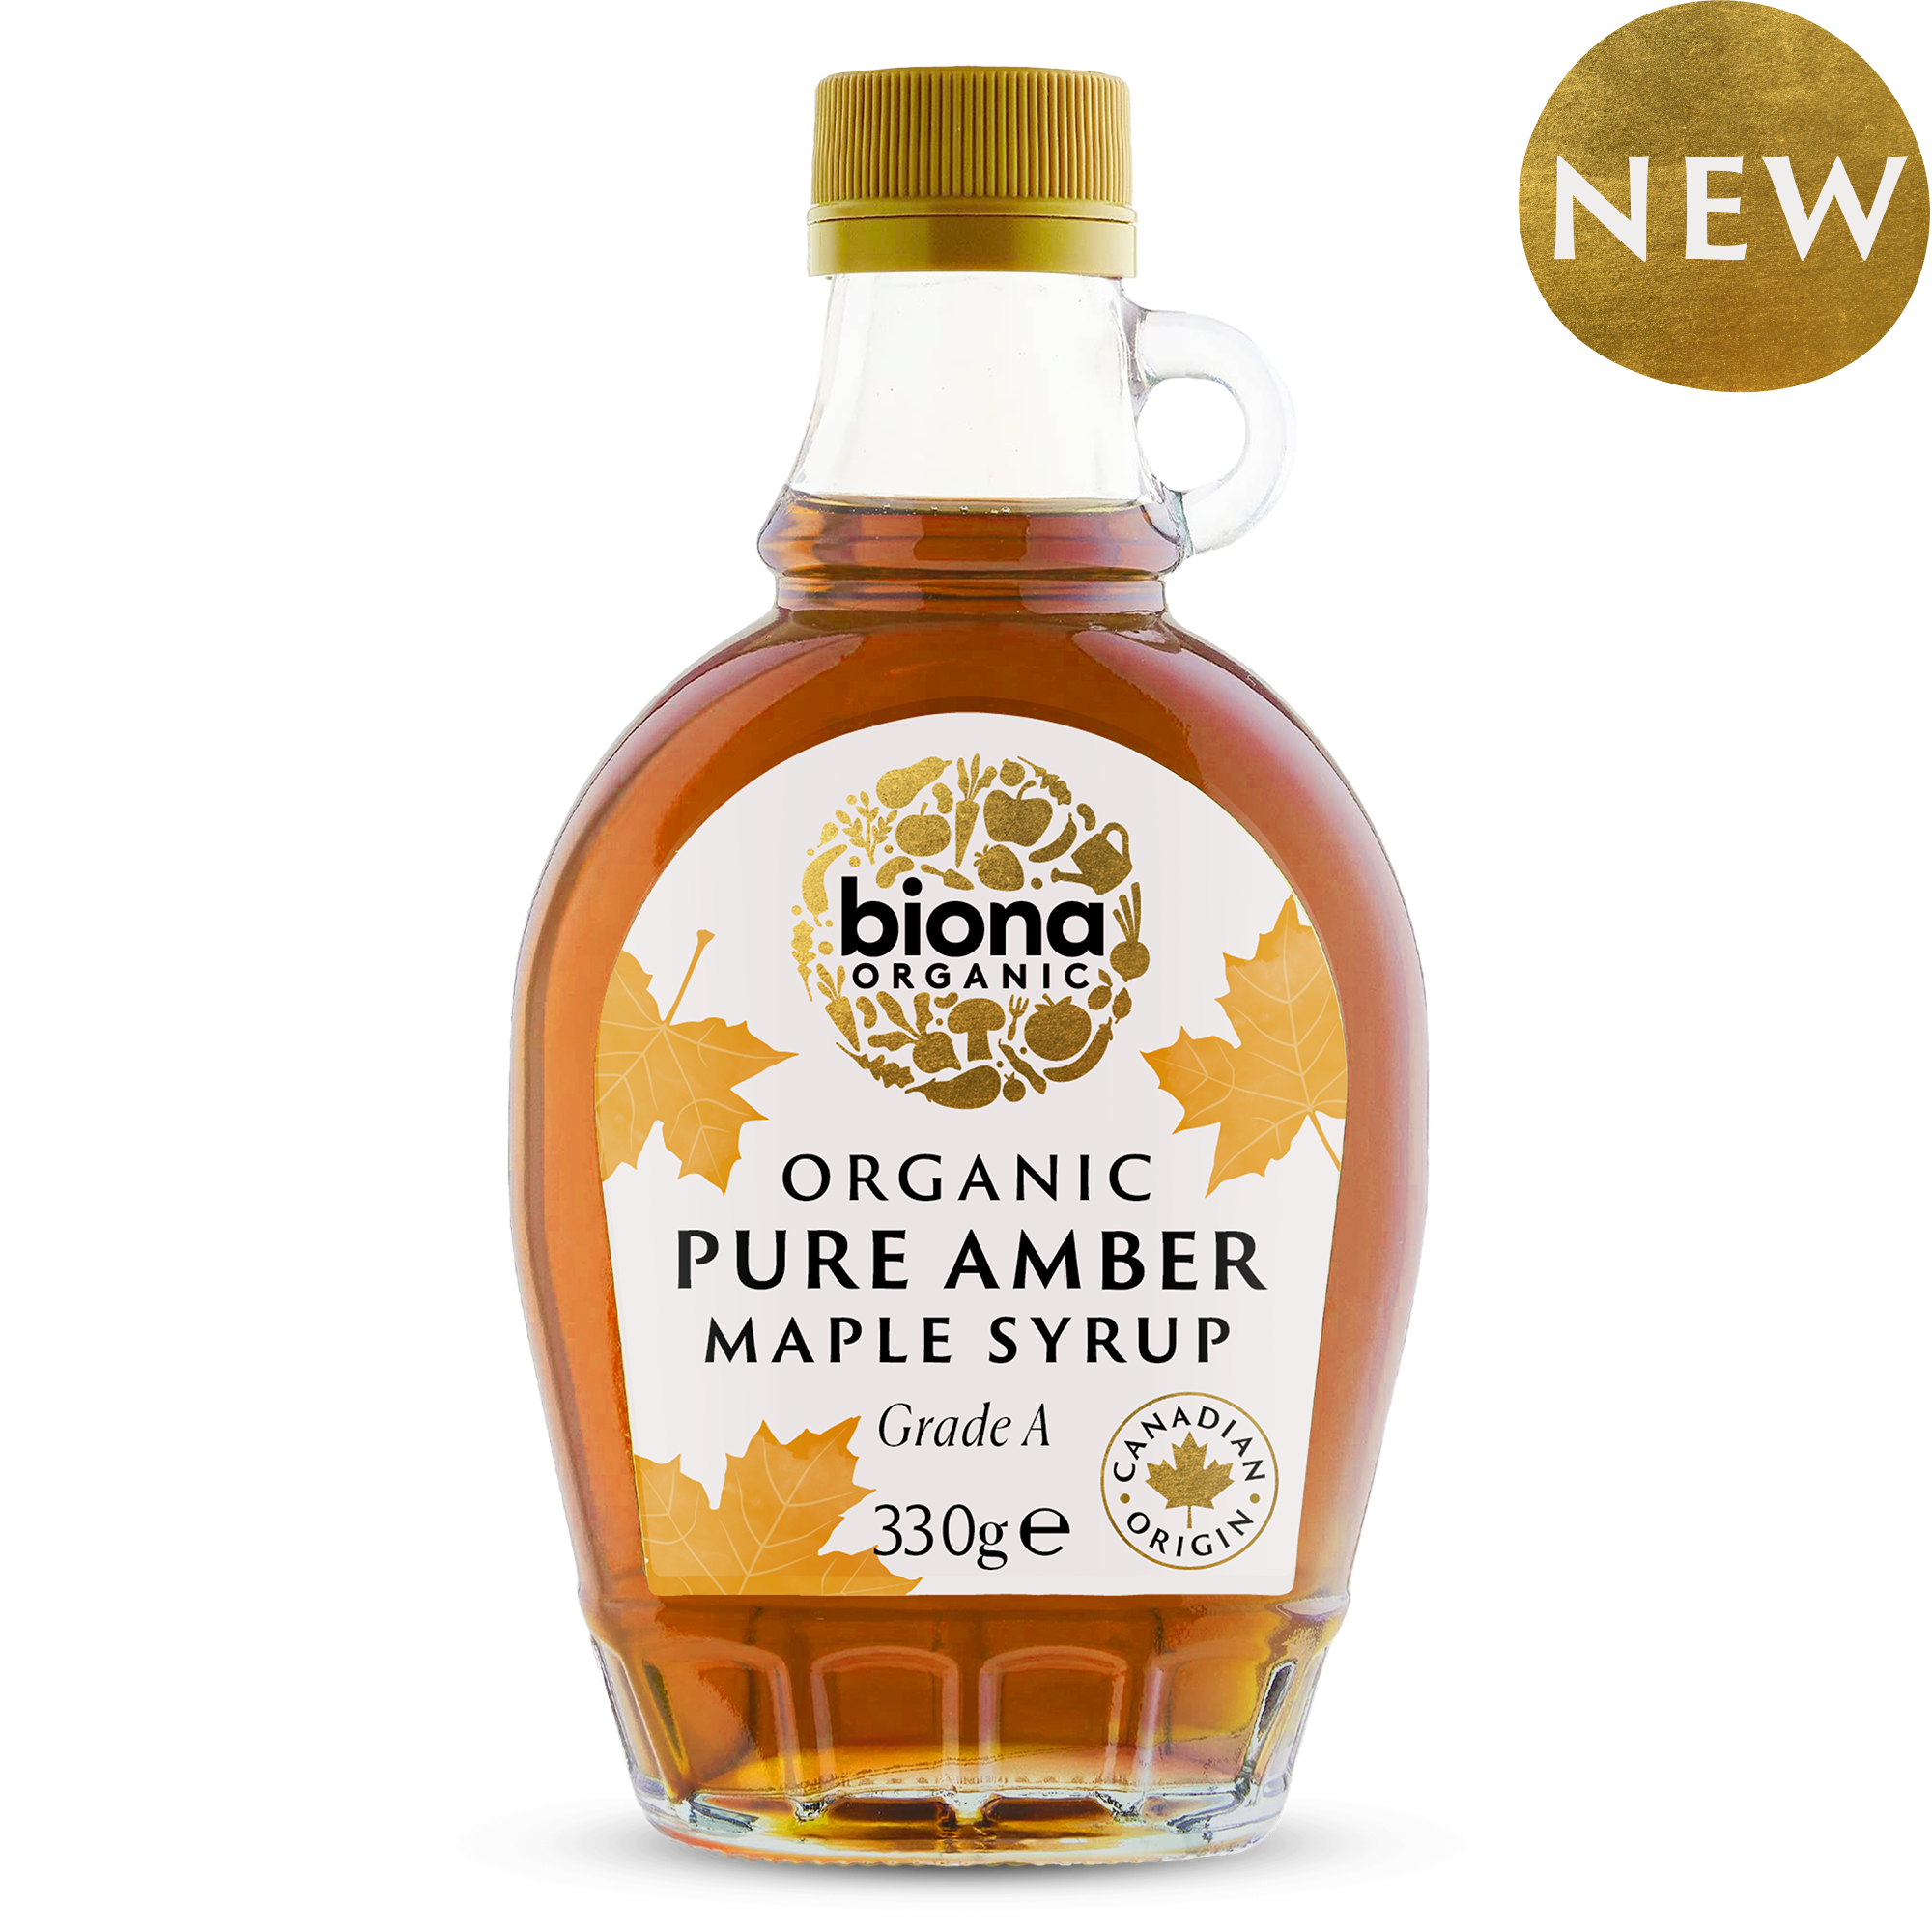 PURE AMBER MAPLE SYRUP